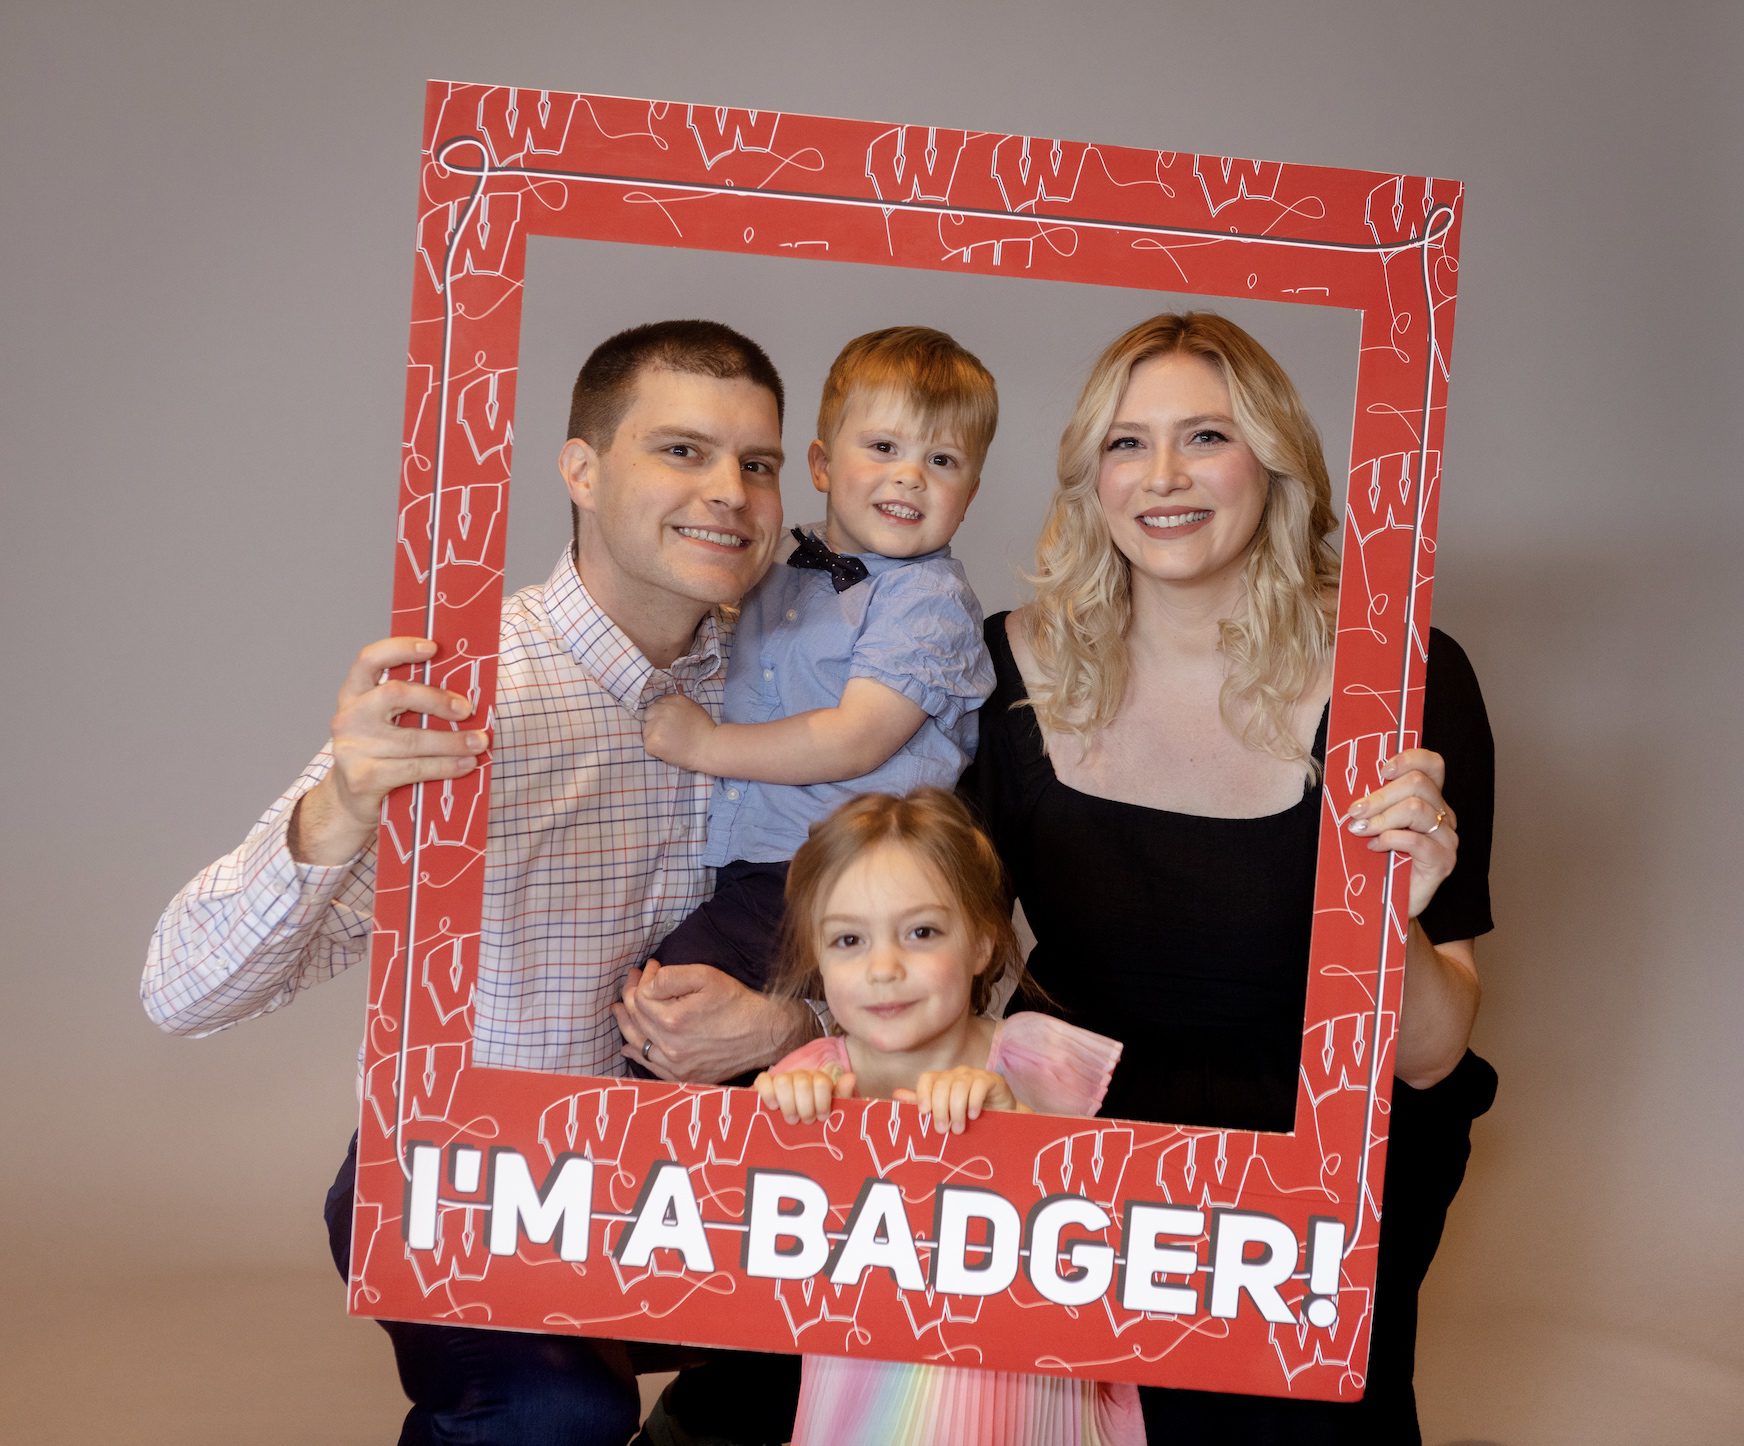 A husband, wife and their two kids smiling behind a sign that says "I'm A Badger!"